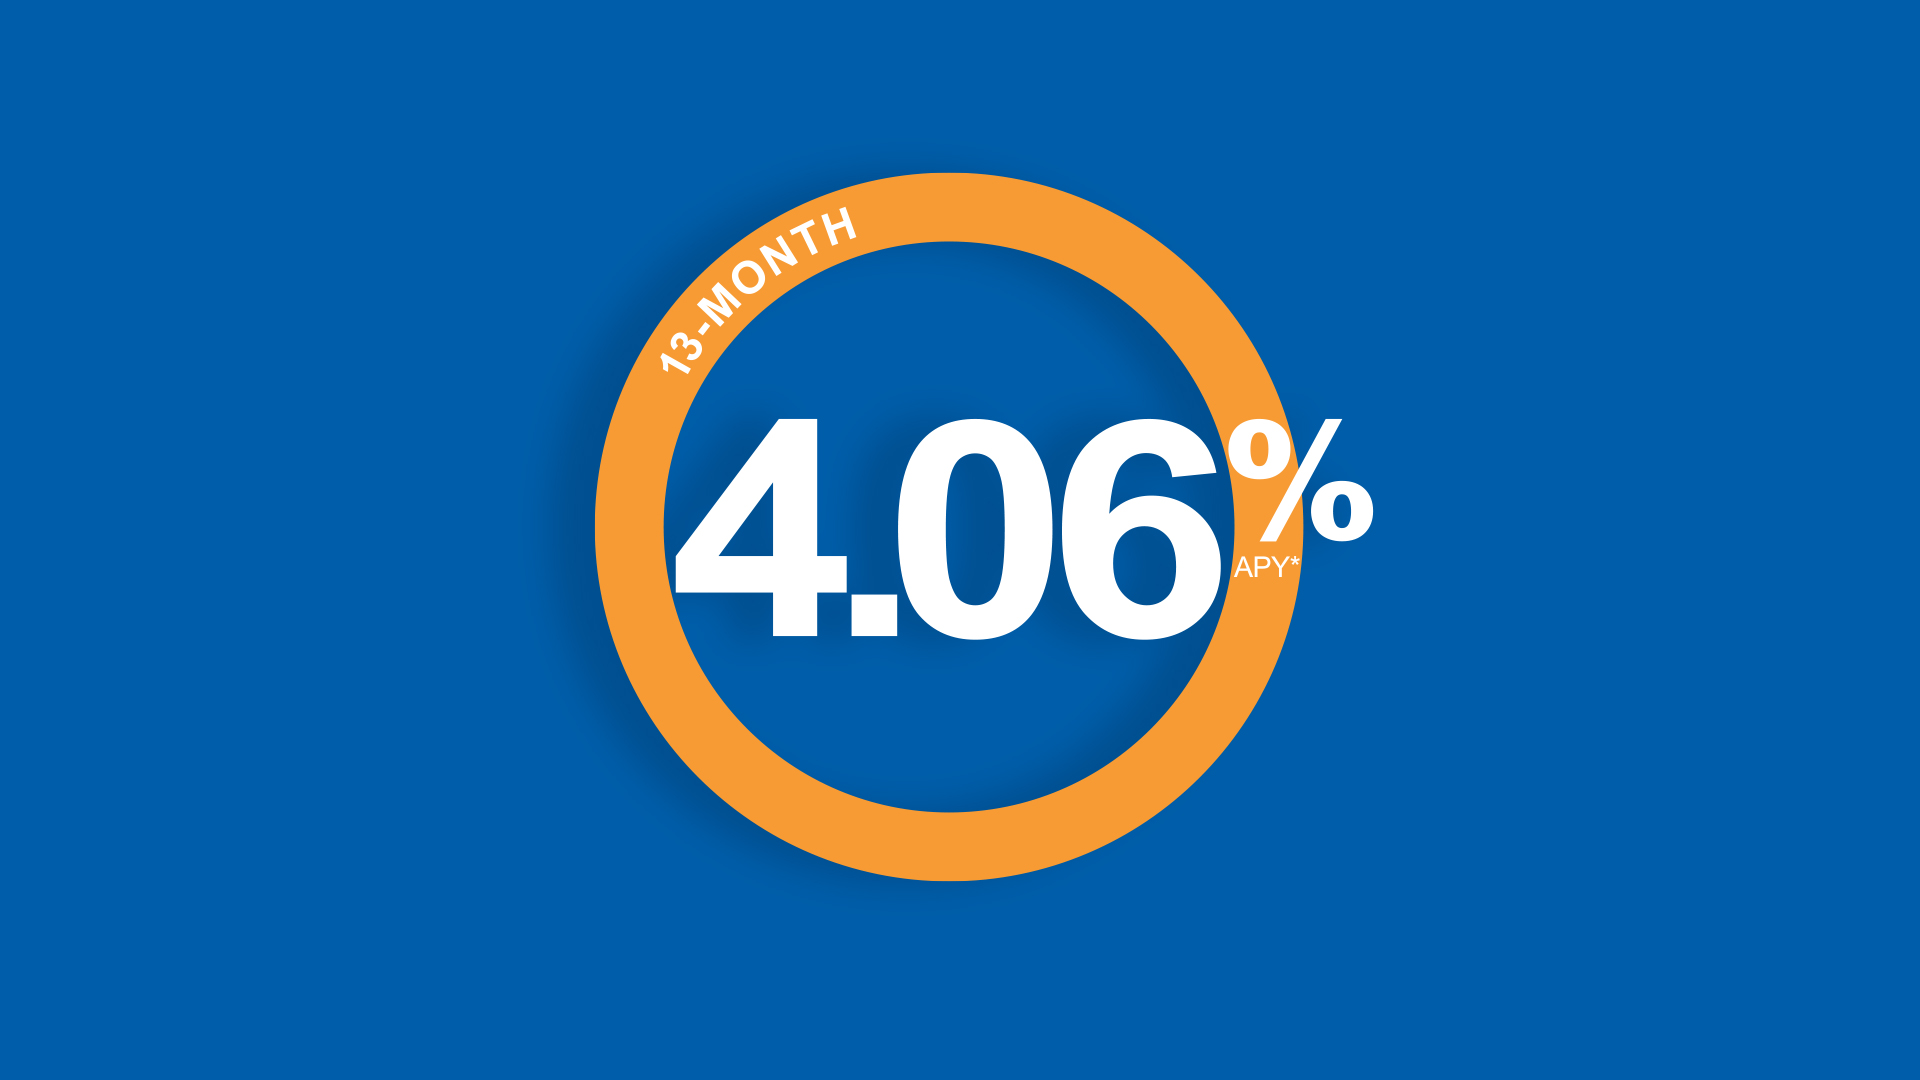 Albank 13 Month CD Promo 4.06% APY